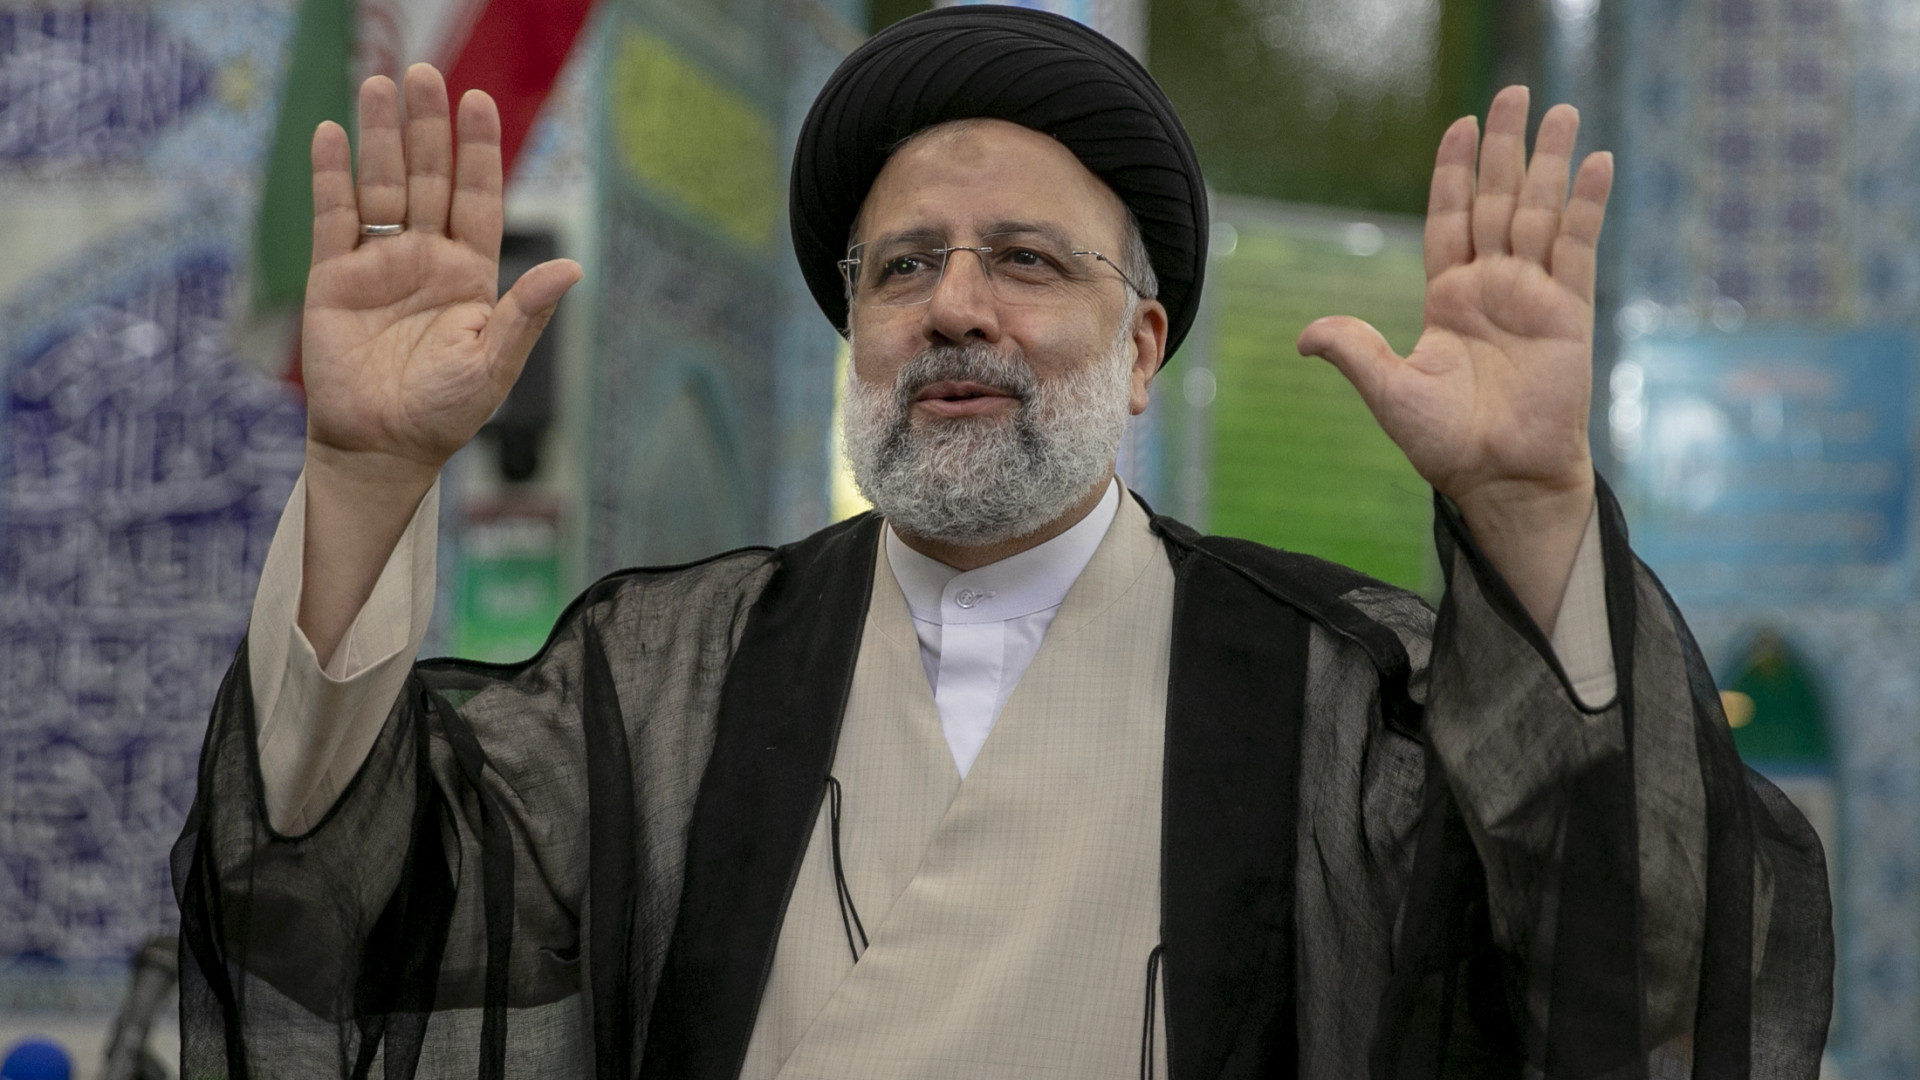 It appears that a new hard-line leader has been chosen by Iran